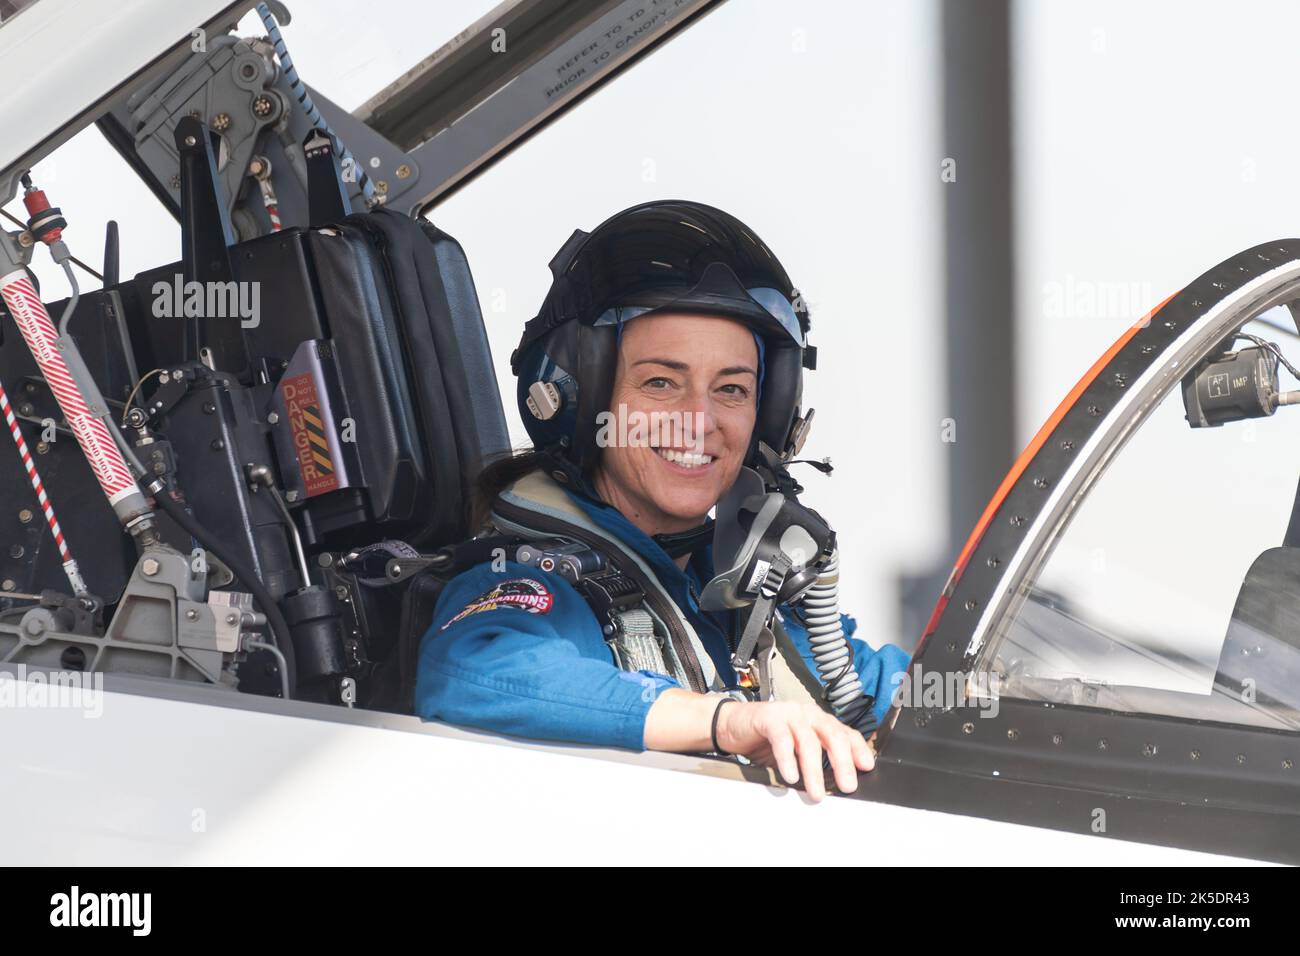 Houston, United States of America. 15 November, 2018. NASA astronaut Nicole Mann, sits in a Northrop T-38 Talon supersonic jet trainer during Commercial Crew Program astronaut training at the Johnson Space Center, November 15, 2018 in Houston, Texas. Mann is the first Native American and first woman to command a NASA mission in space.  Credit: James Blair/NASA/Alamy Live News Stock Photo